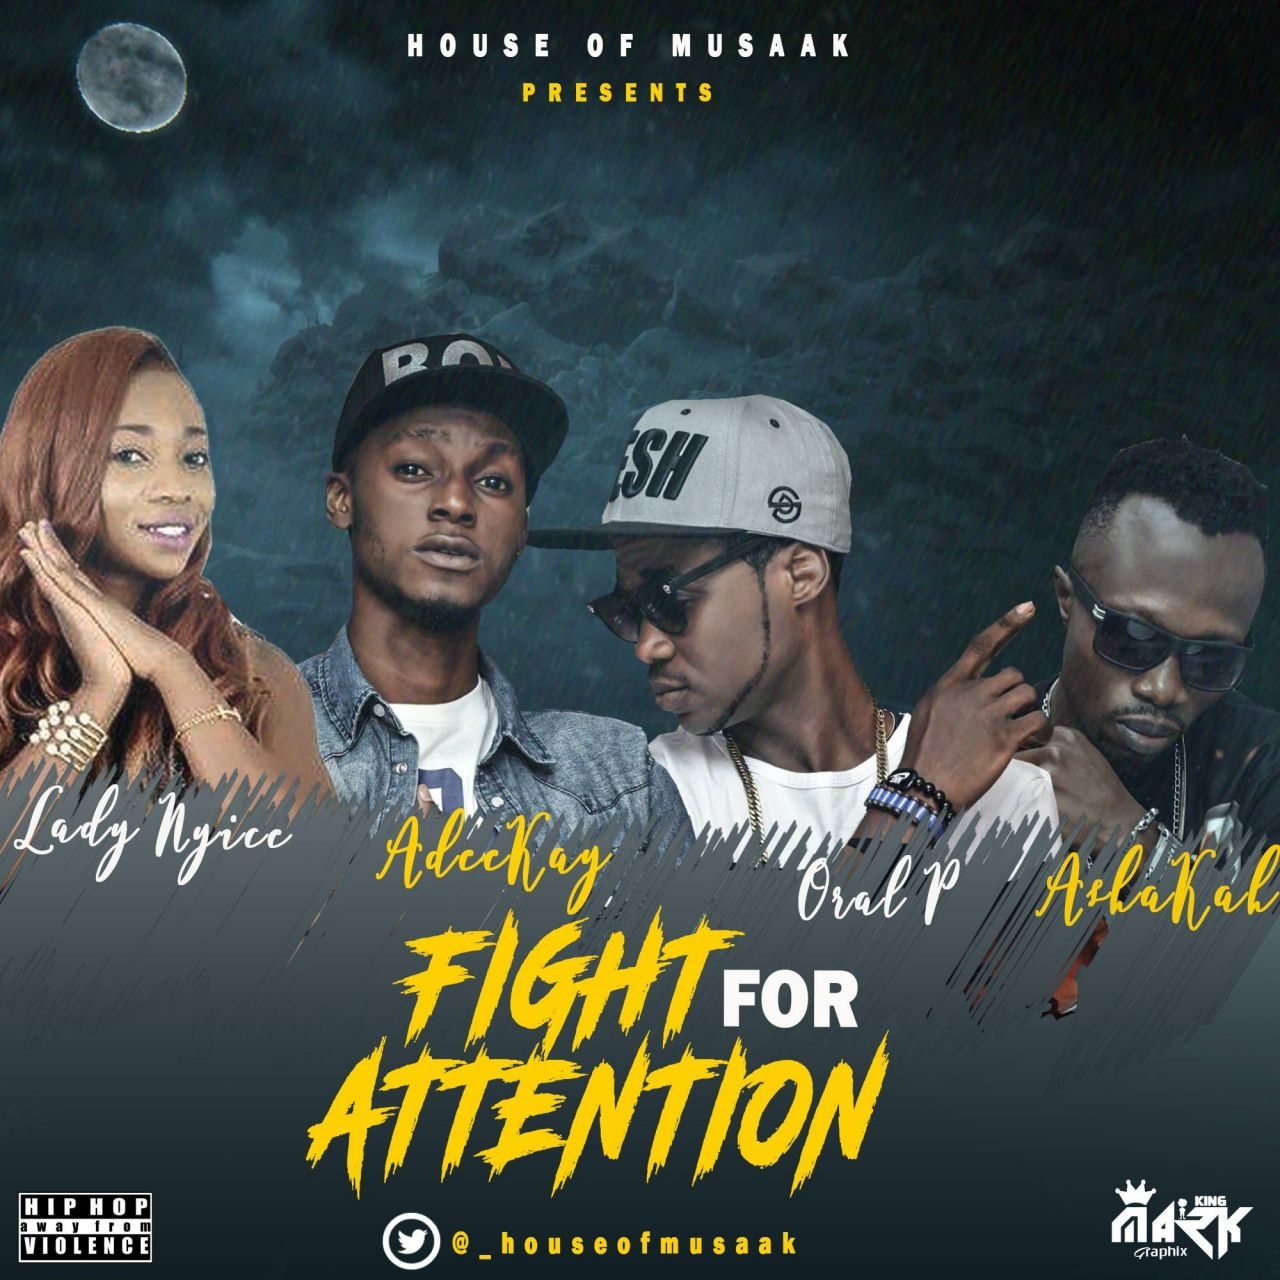 VIDEO: House Of Musaak – Fight For Attention